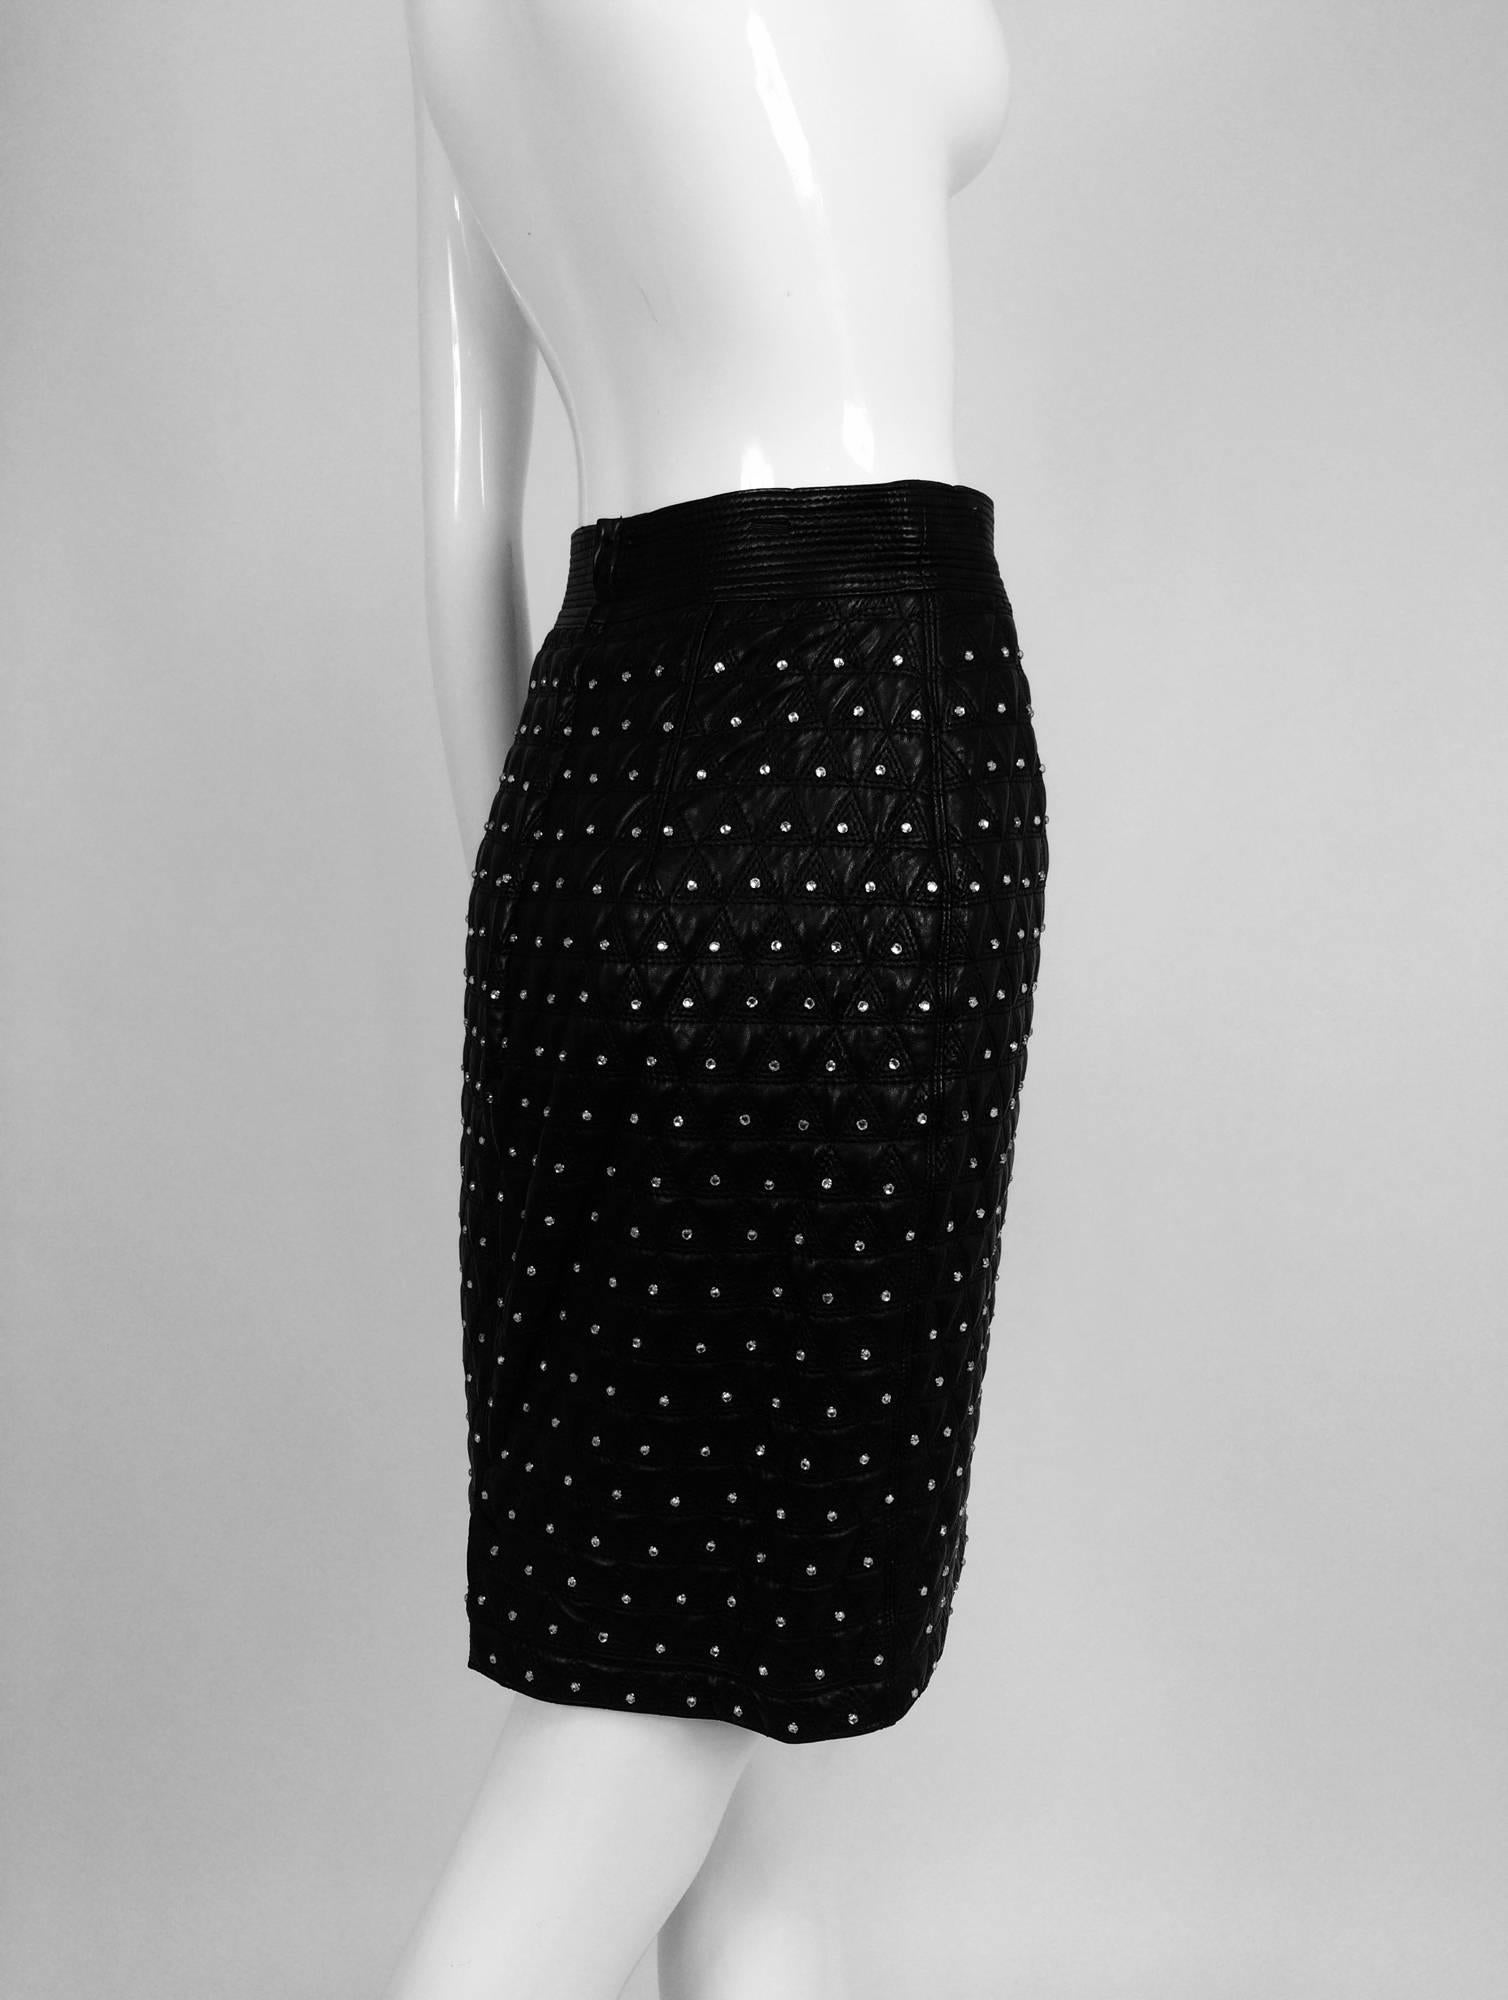 Gianni Versace Quilted black leather & rhinestone skirt 1980s...High waist skirt has a horizontal band of plain black leather, the skirt is diamond quilted each center set with a crystal rhinestone...Fully lined in black rayon...2 1/2